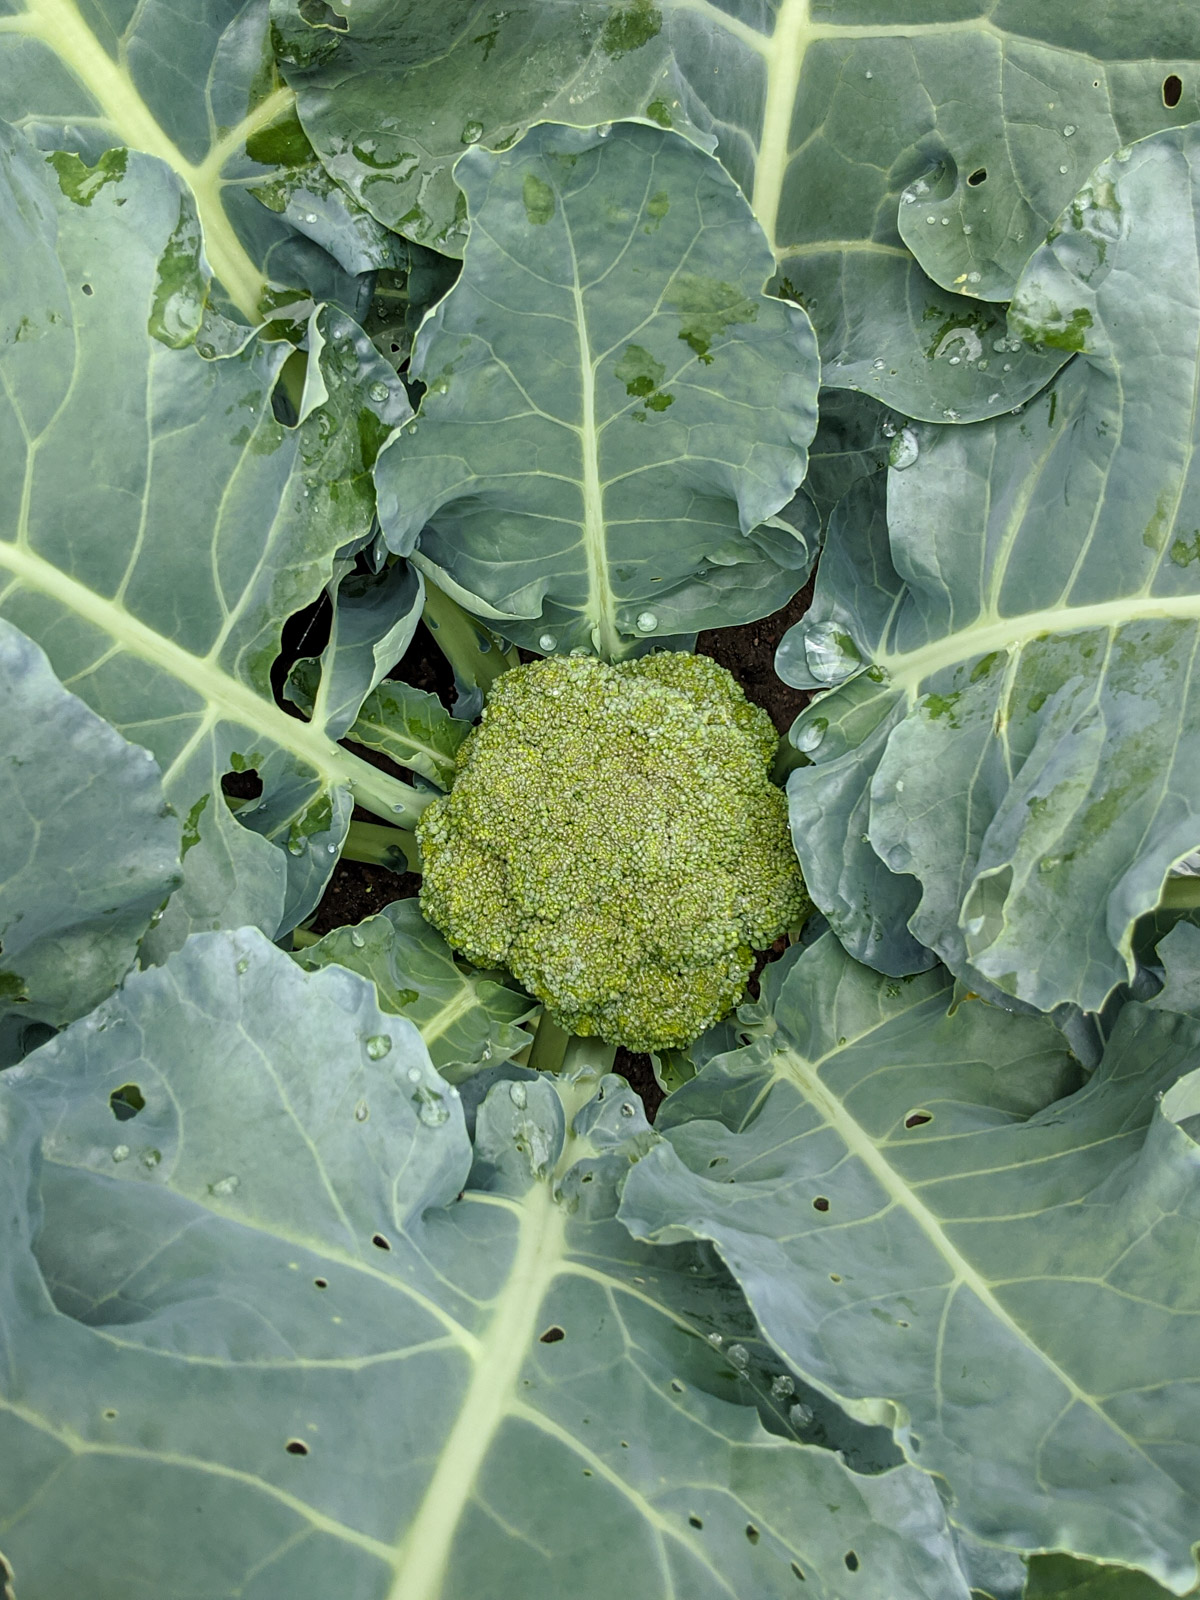 A head of broccoli surrounded by its leaves.